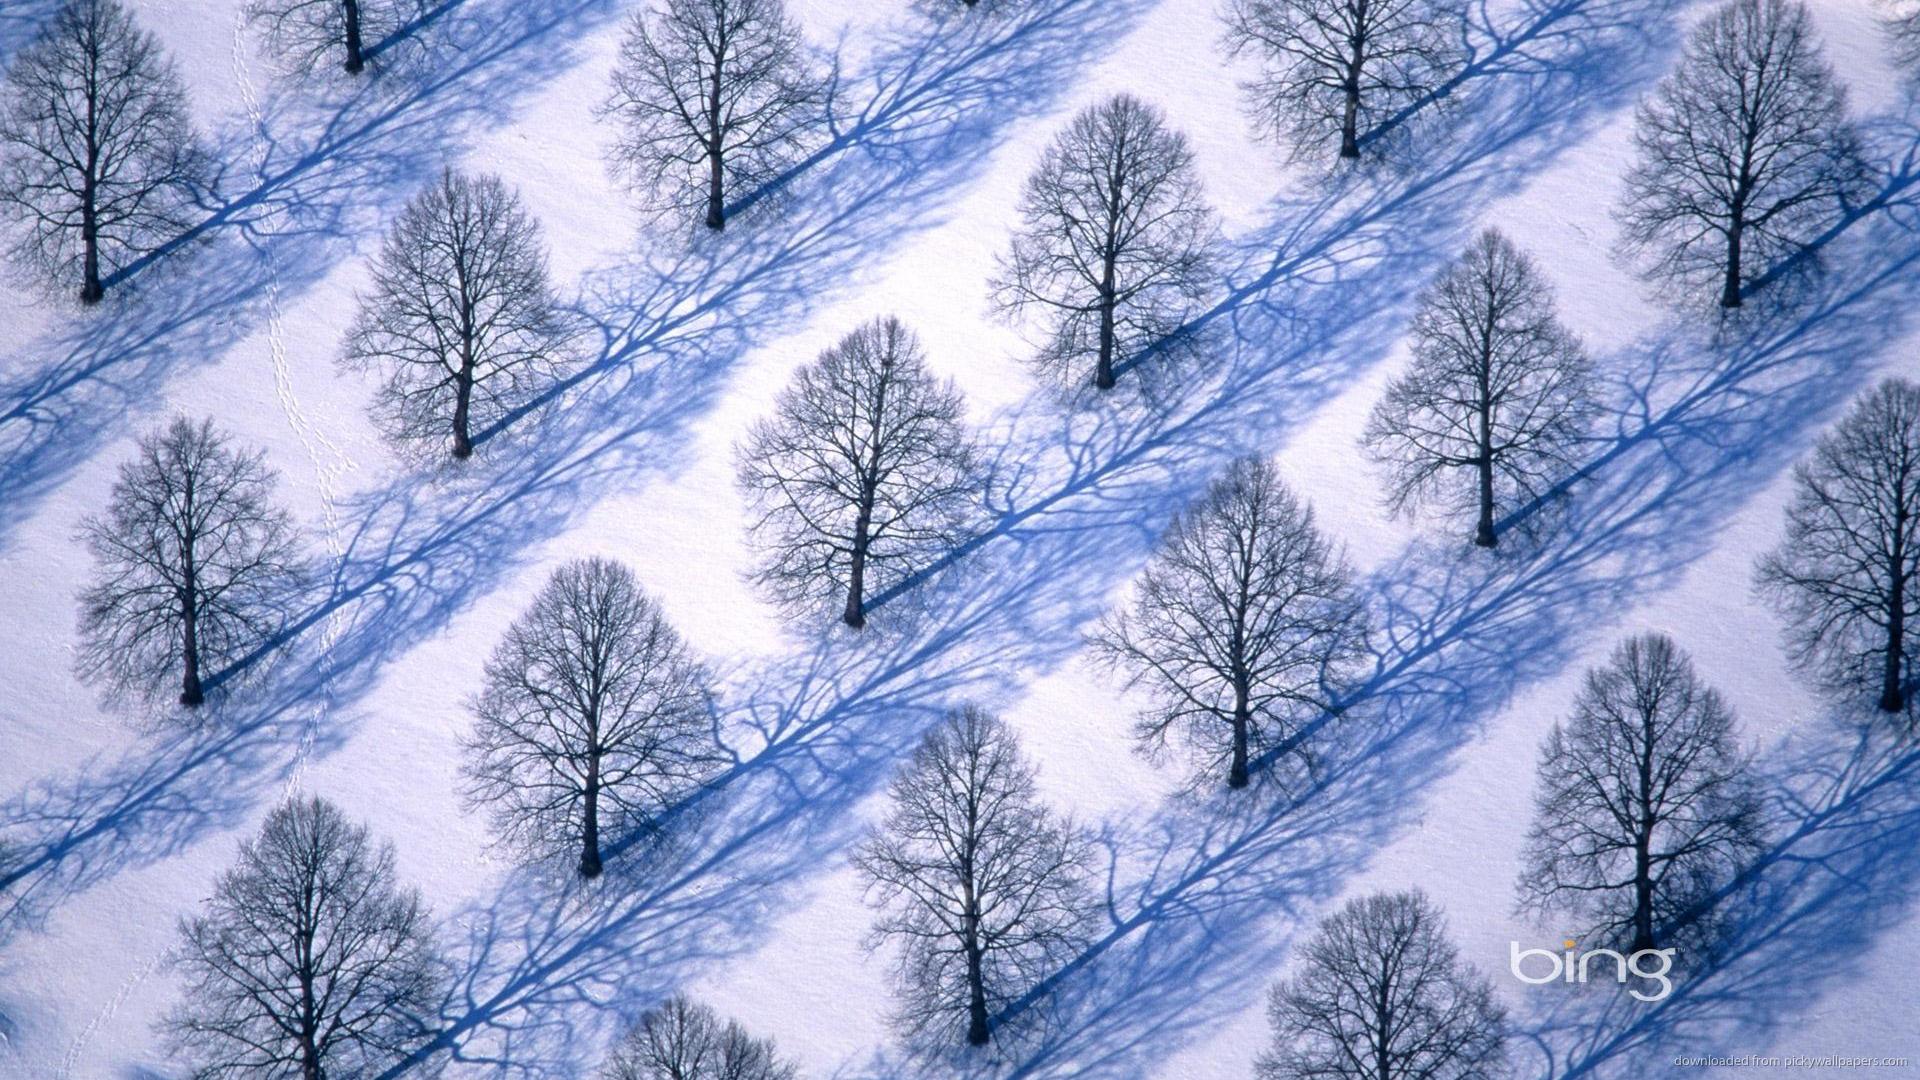 Bing Symmetric Trees Picture For iPhone Blackberry iPad